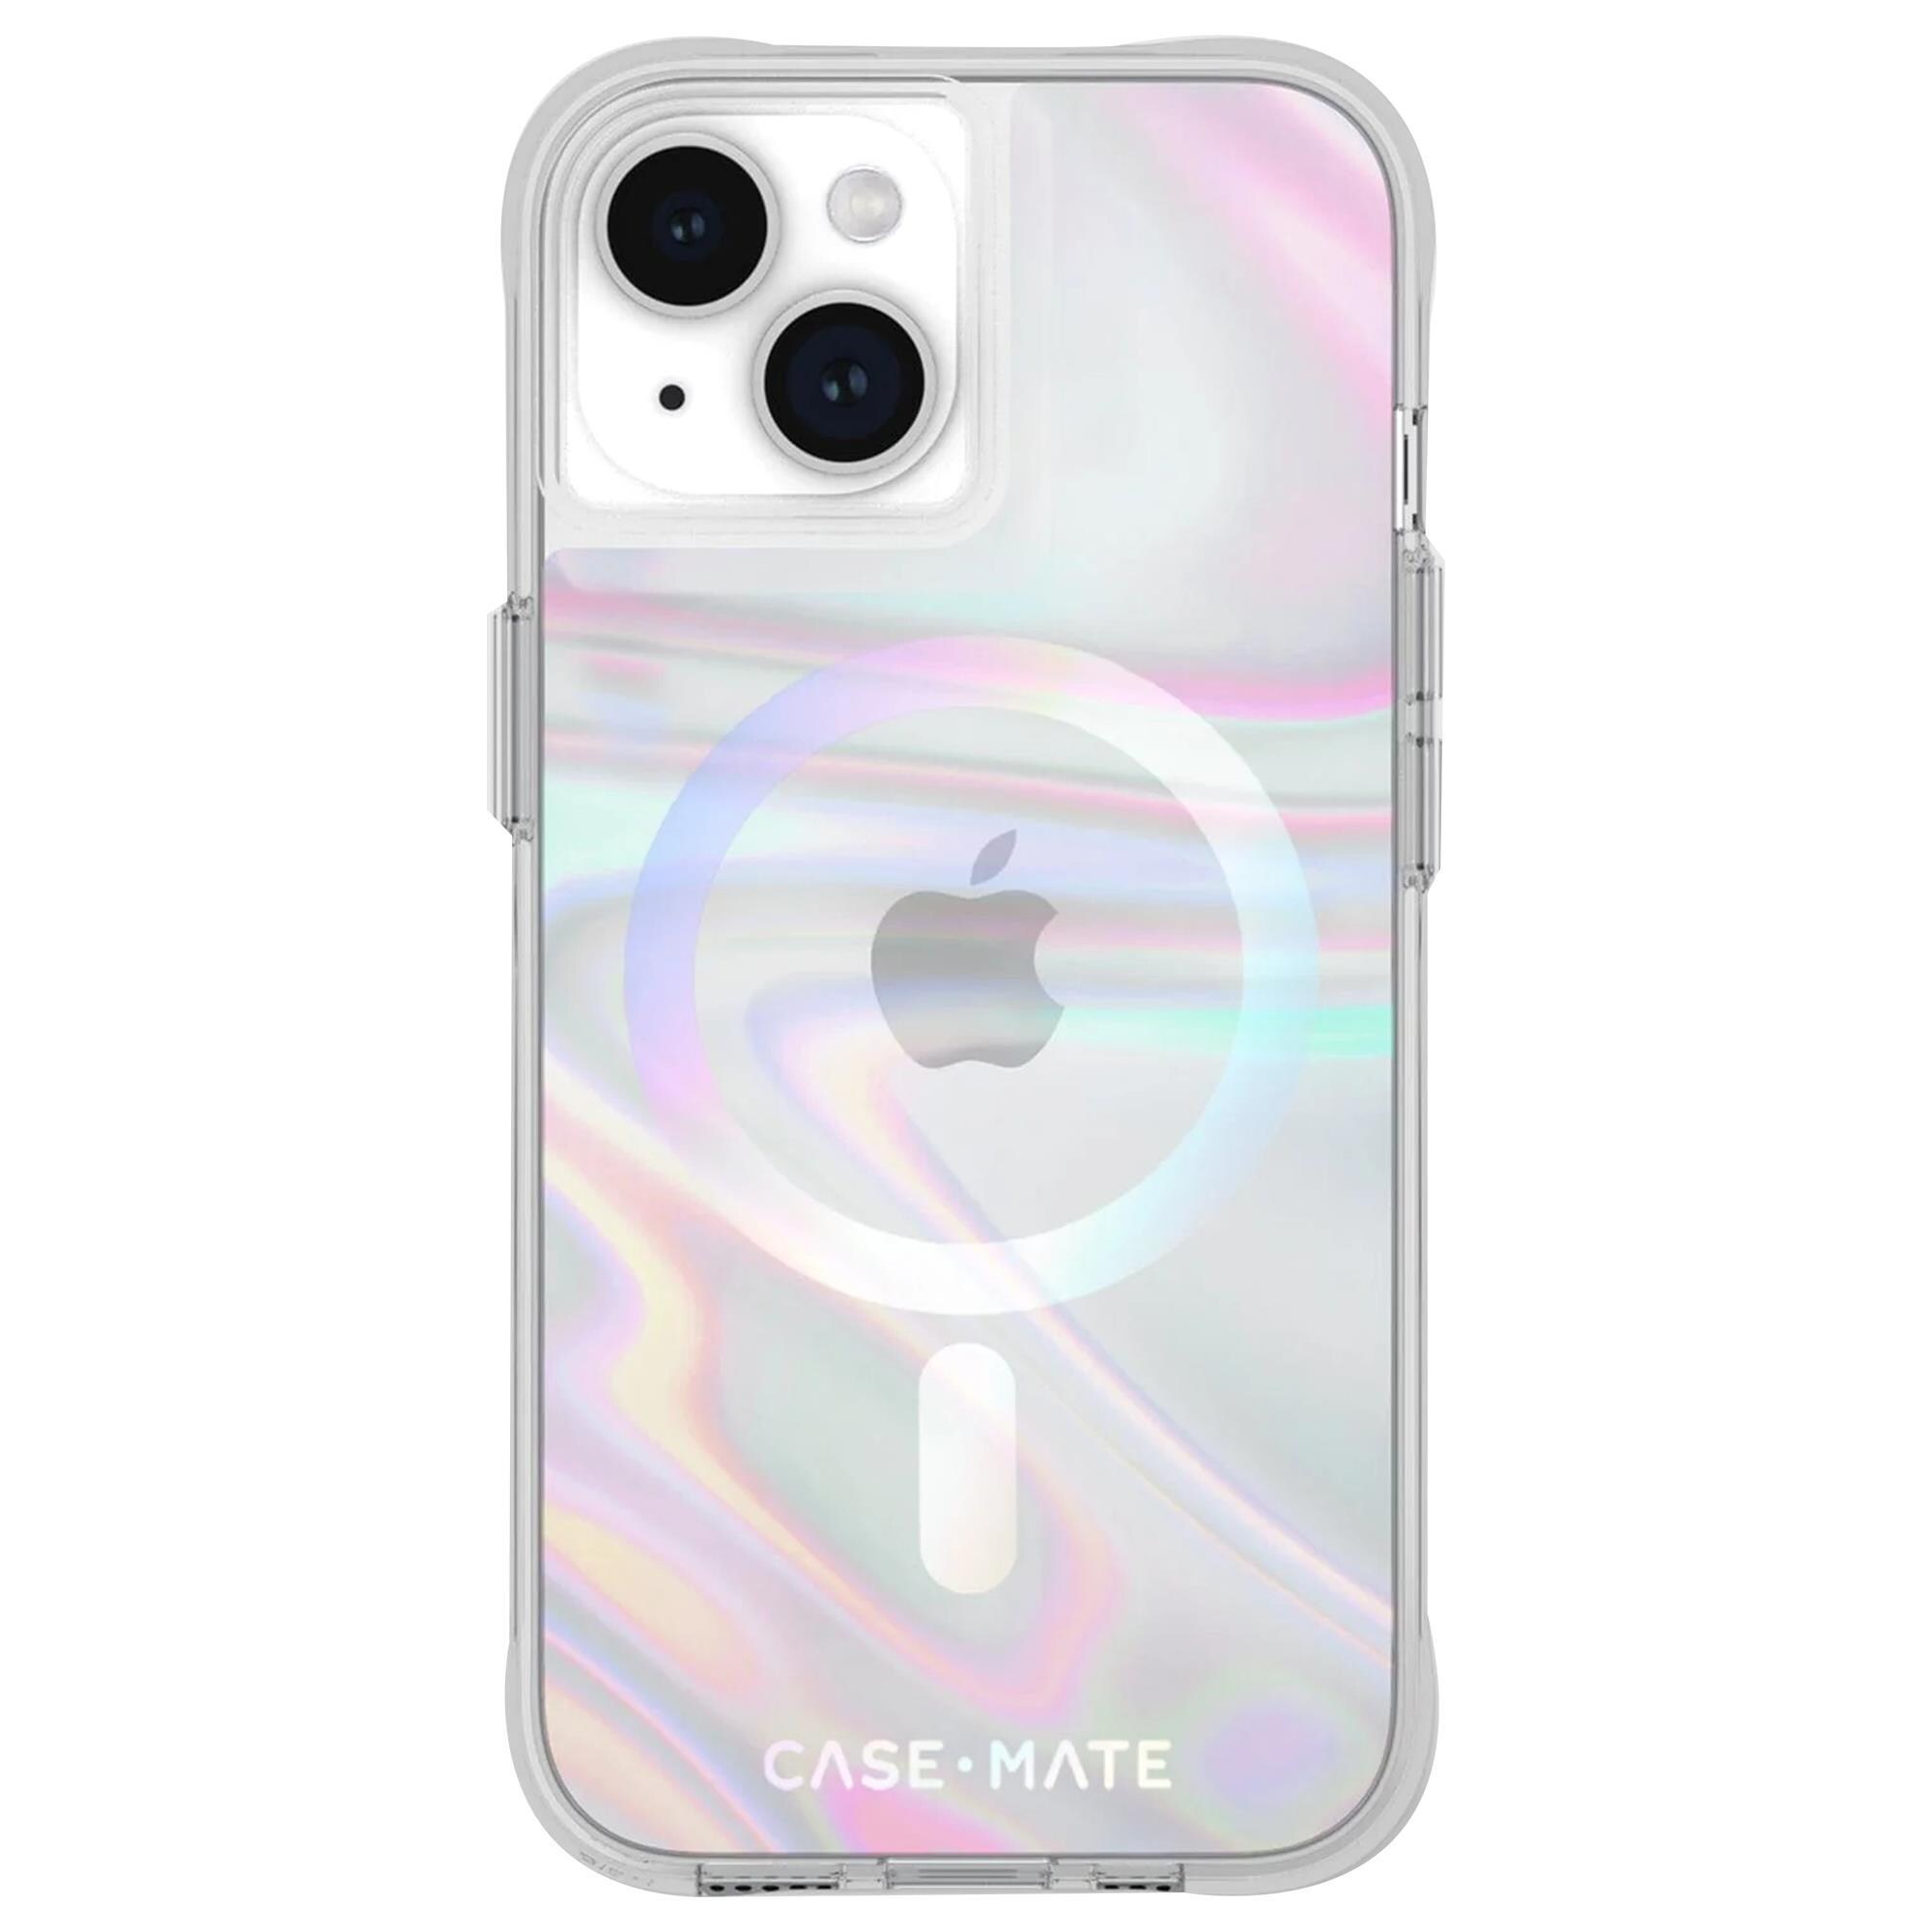 Our Iridescent Mous case looking 🔥on the brand new iPhone 15 Pro